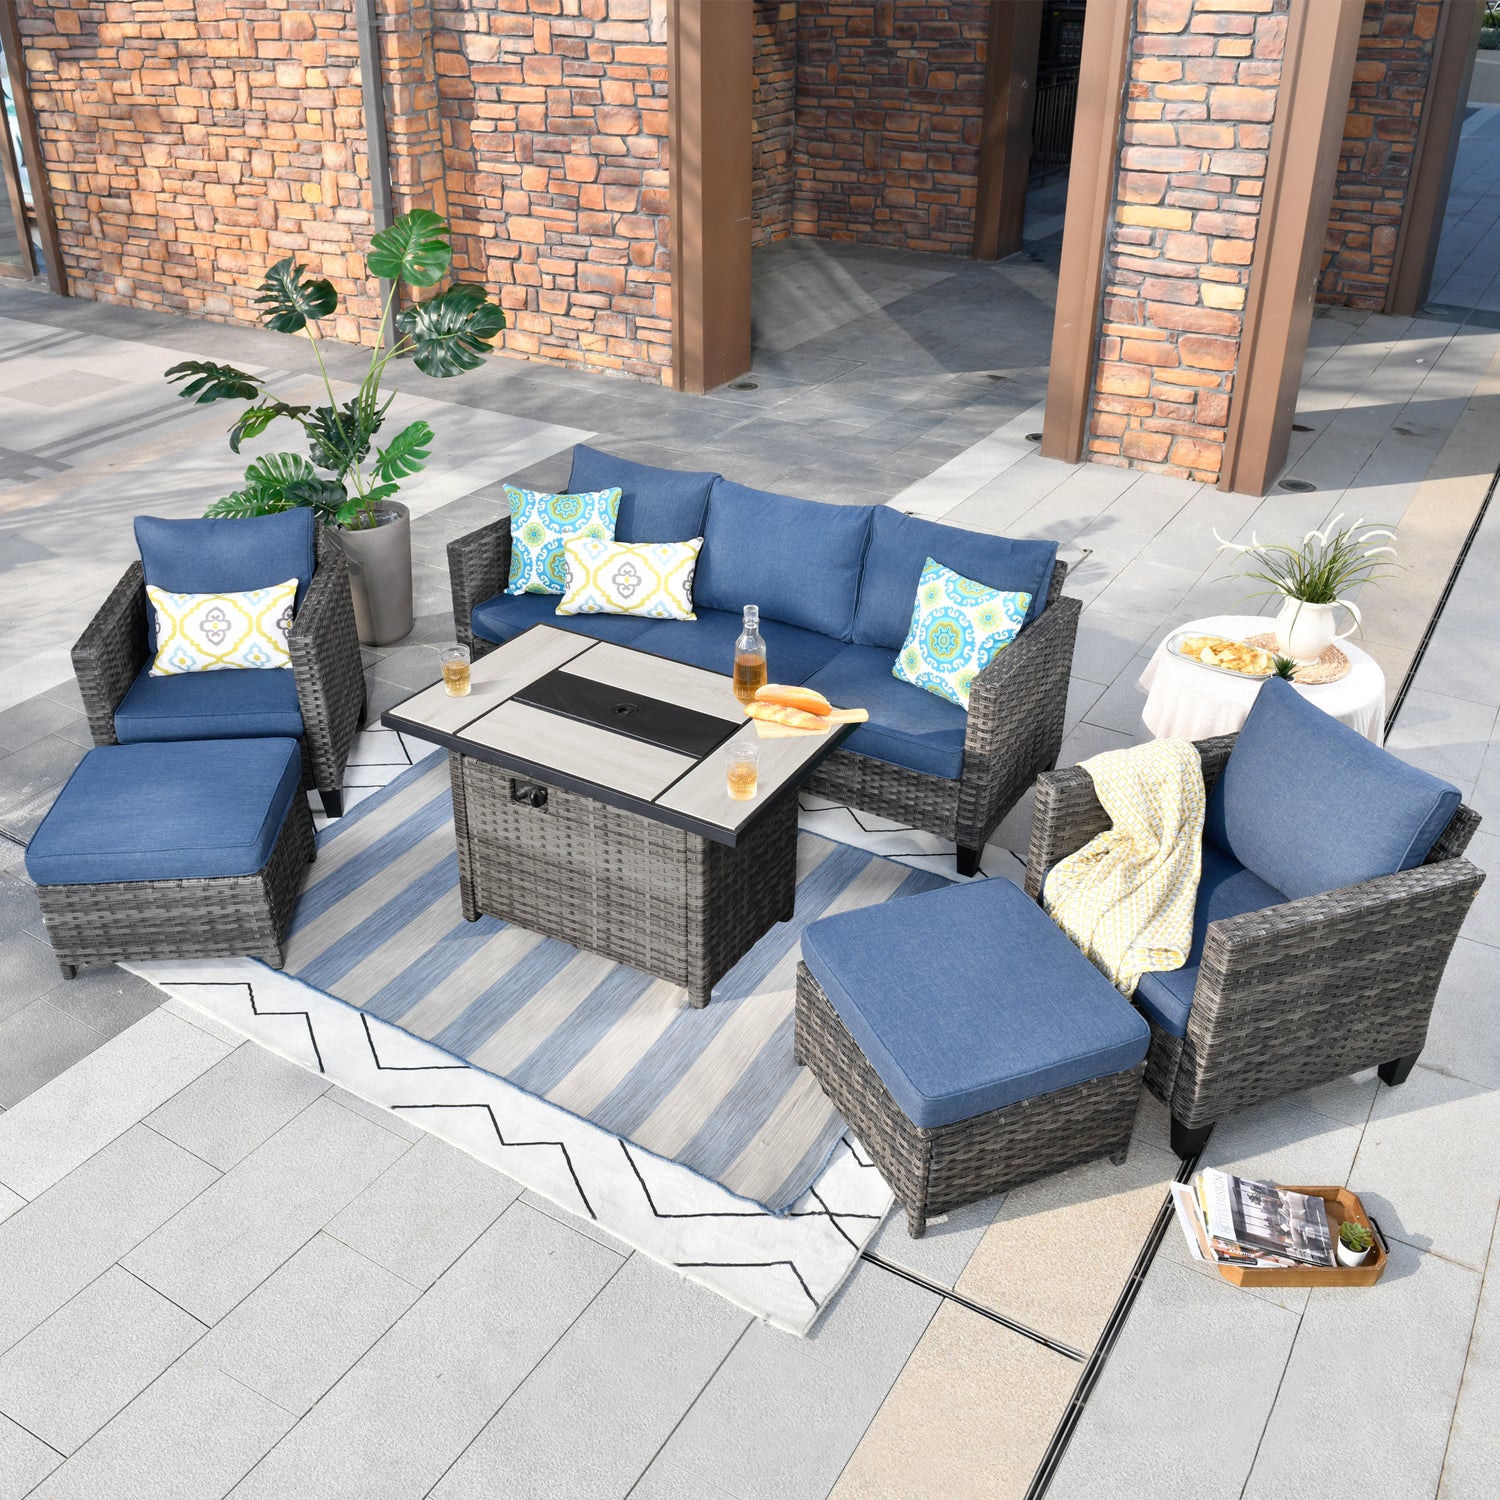 Achieving a Green Lifestyle: Choosing Eco-Friendly Patio Furniture